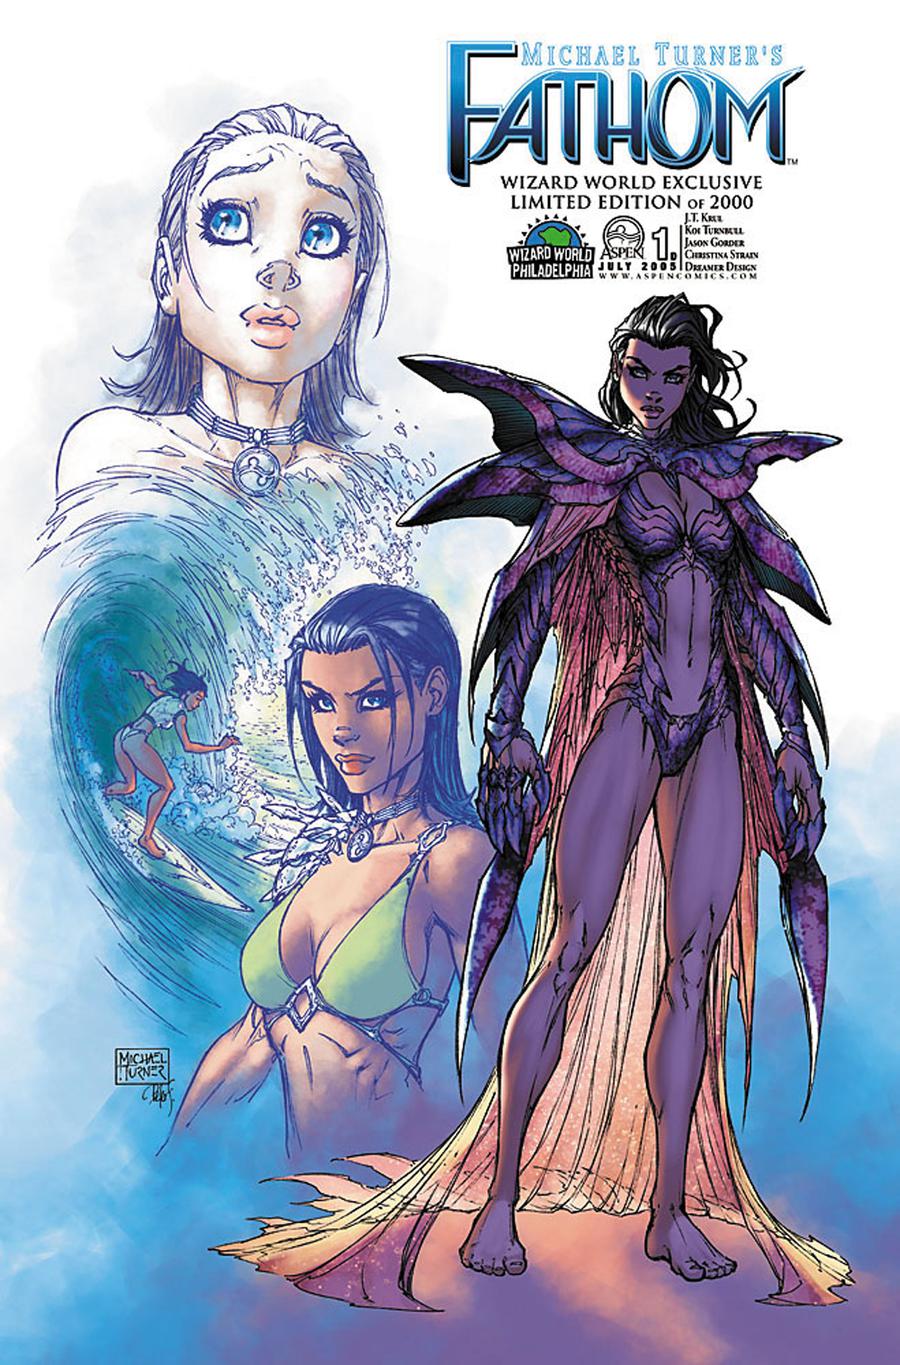 Fathom Vol 2 #1 Cover H Wizard World Philadelphia 2005 Limited Edition Michael Turner Variant Cover